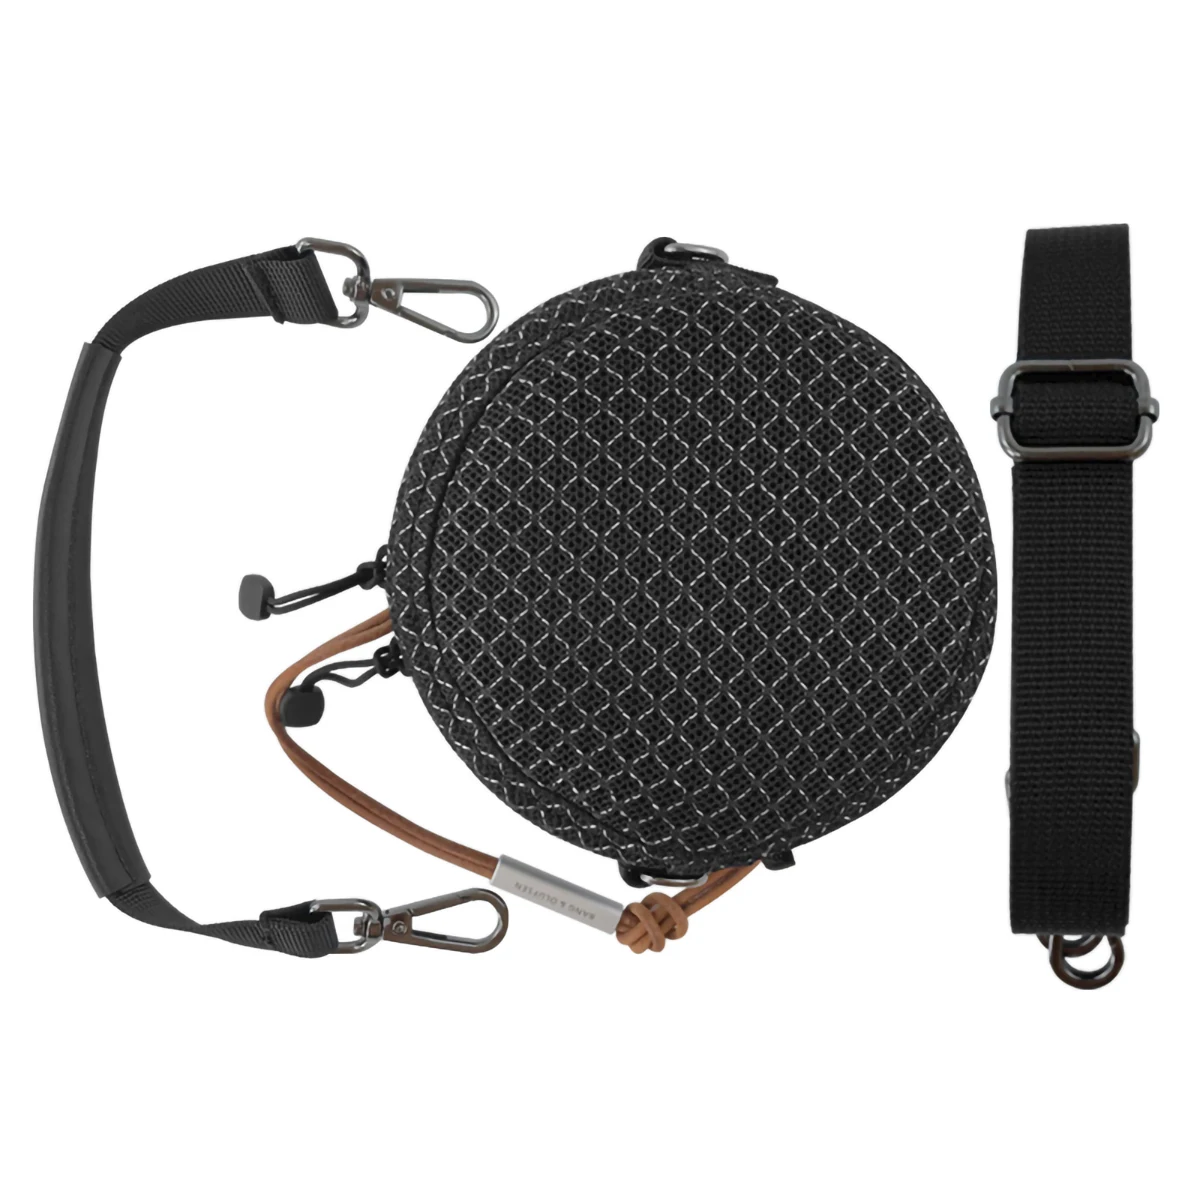 

Mesh Bags for B&O Beosound A1 2nd Speaker Sound Transparent Bag Outdoor Portable Beoplay A1 Bluetooth Speaker Travel Carry Case